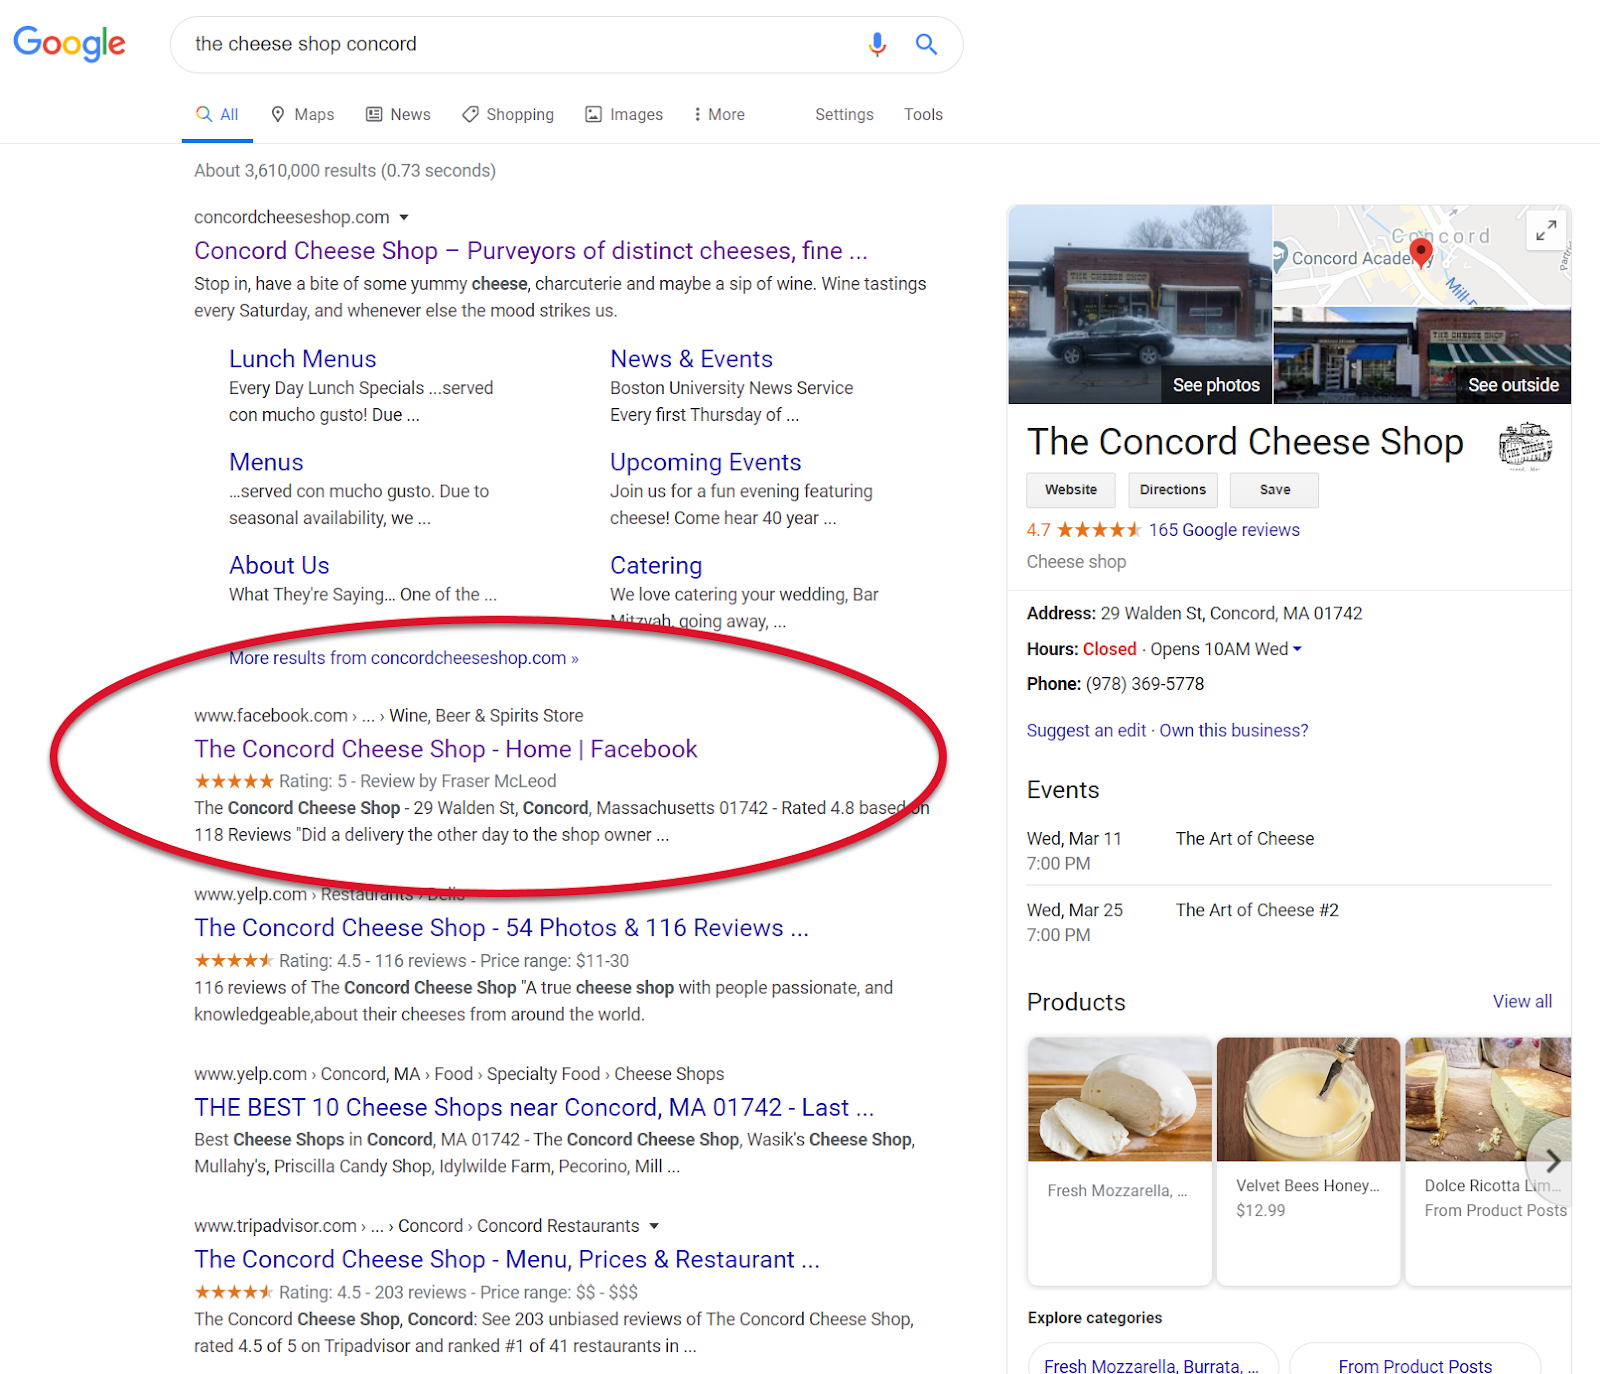 Example of how a business's pages show up up in a typical online search - 1st is website, 2nd is Facebook business page and 3rd is Yelp